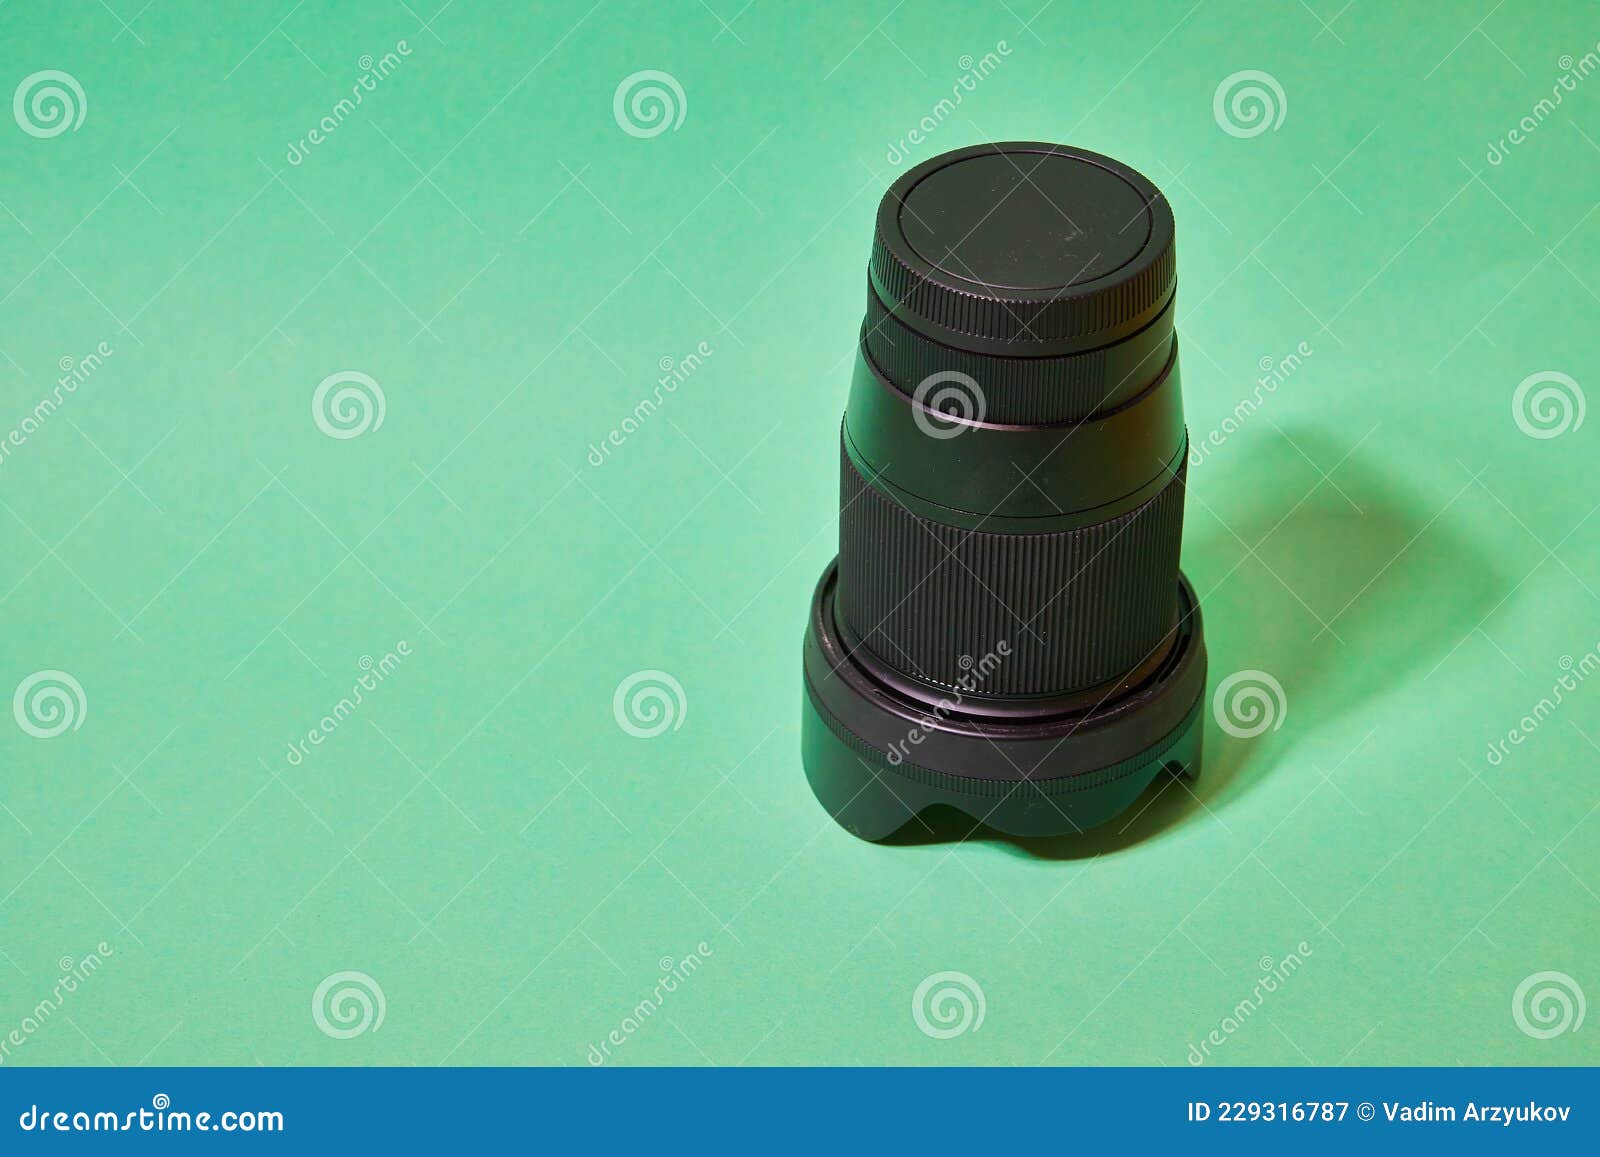 camera lens with protective cover on a green background